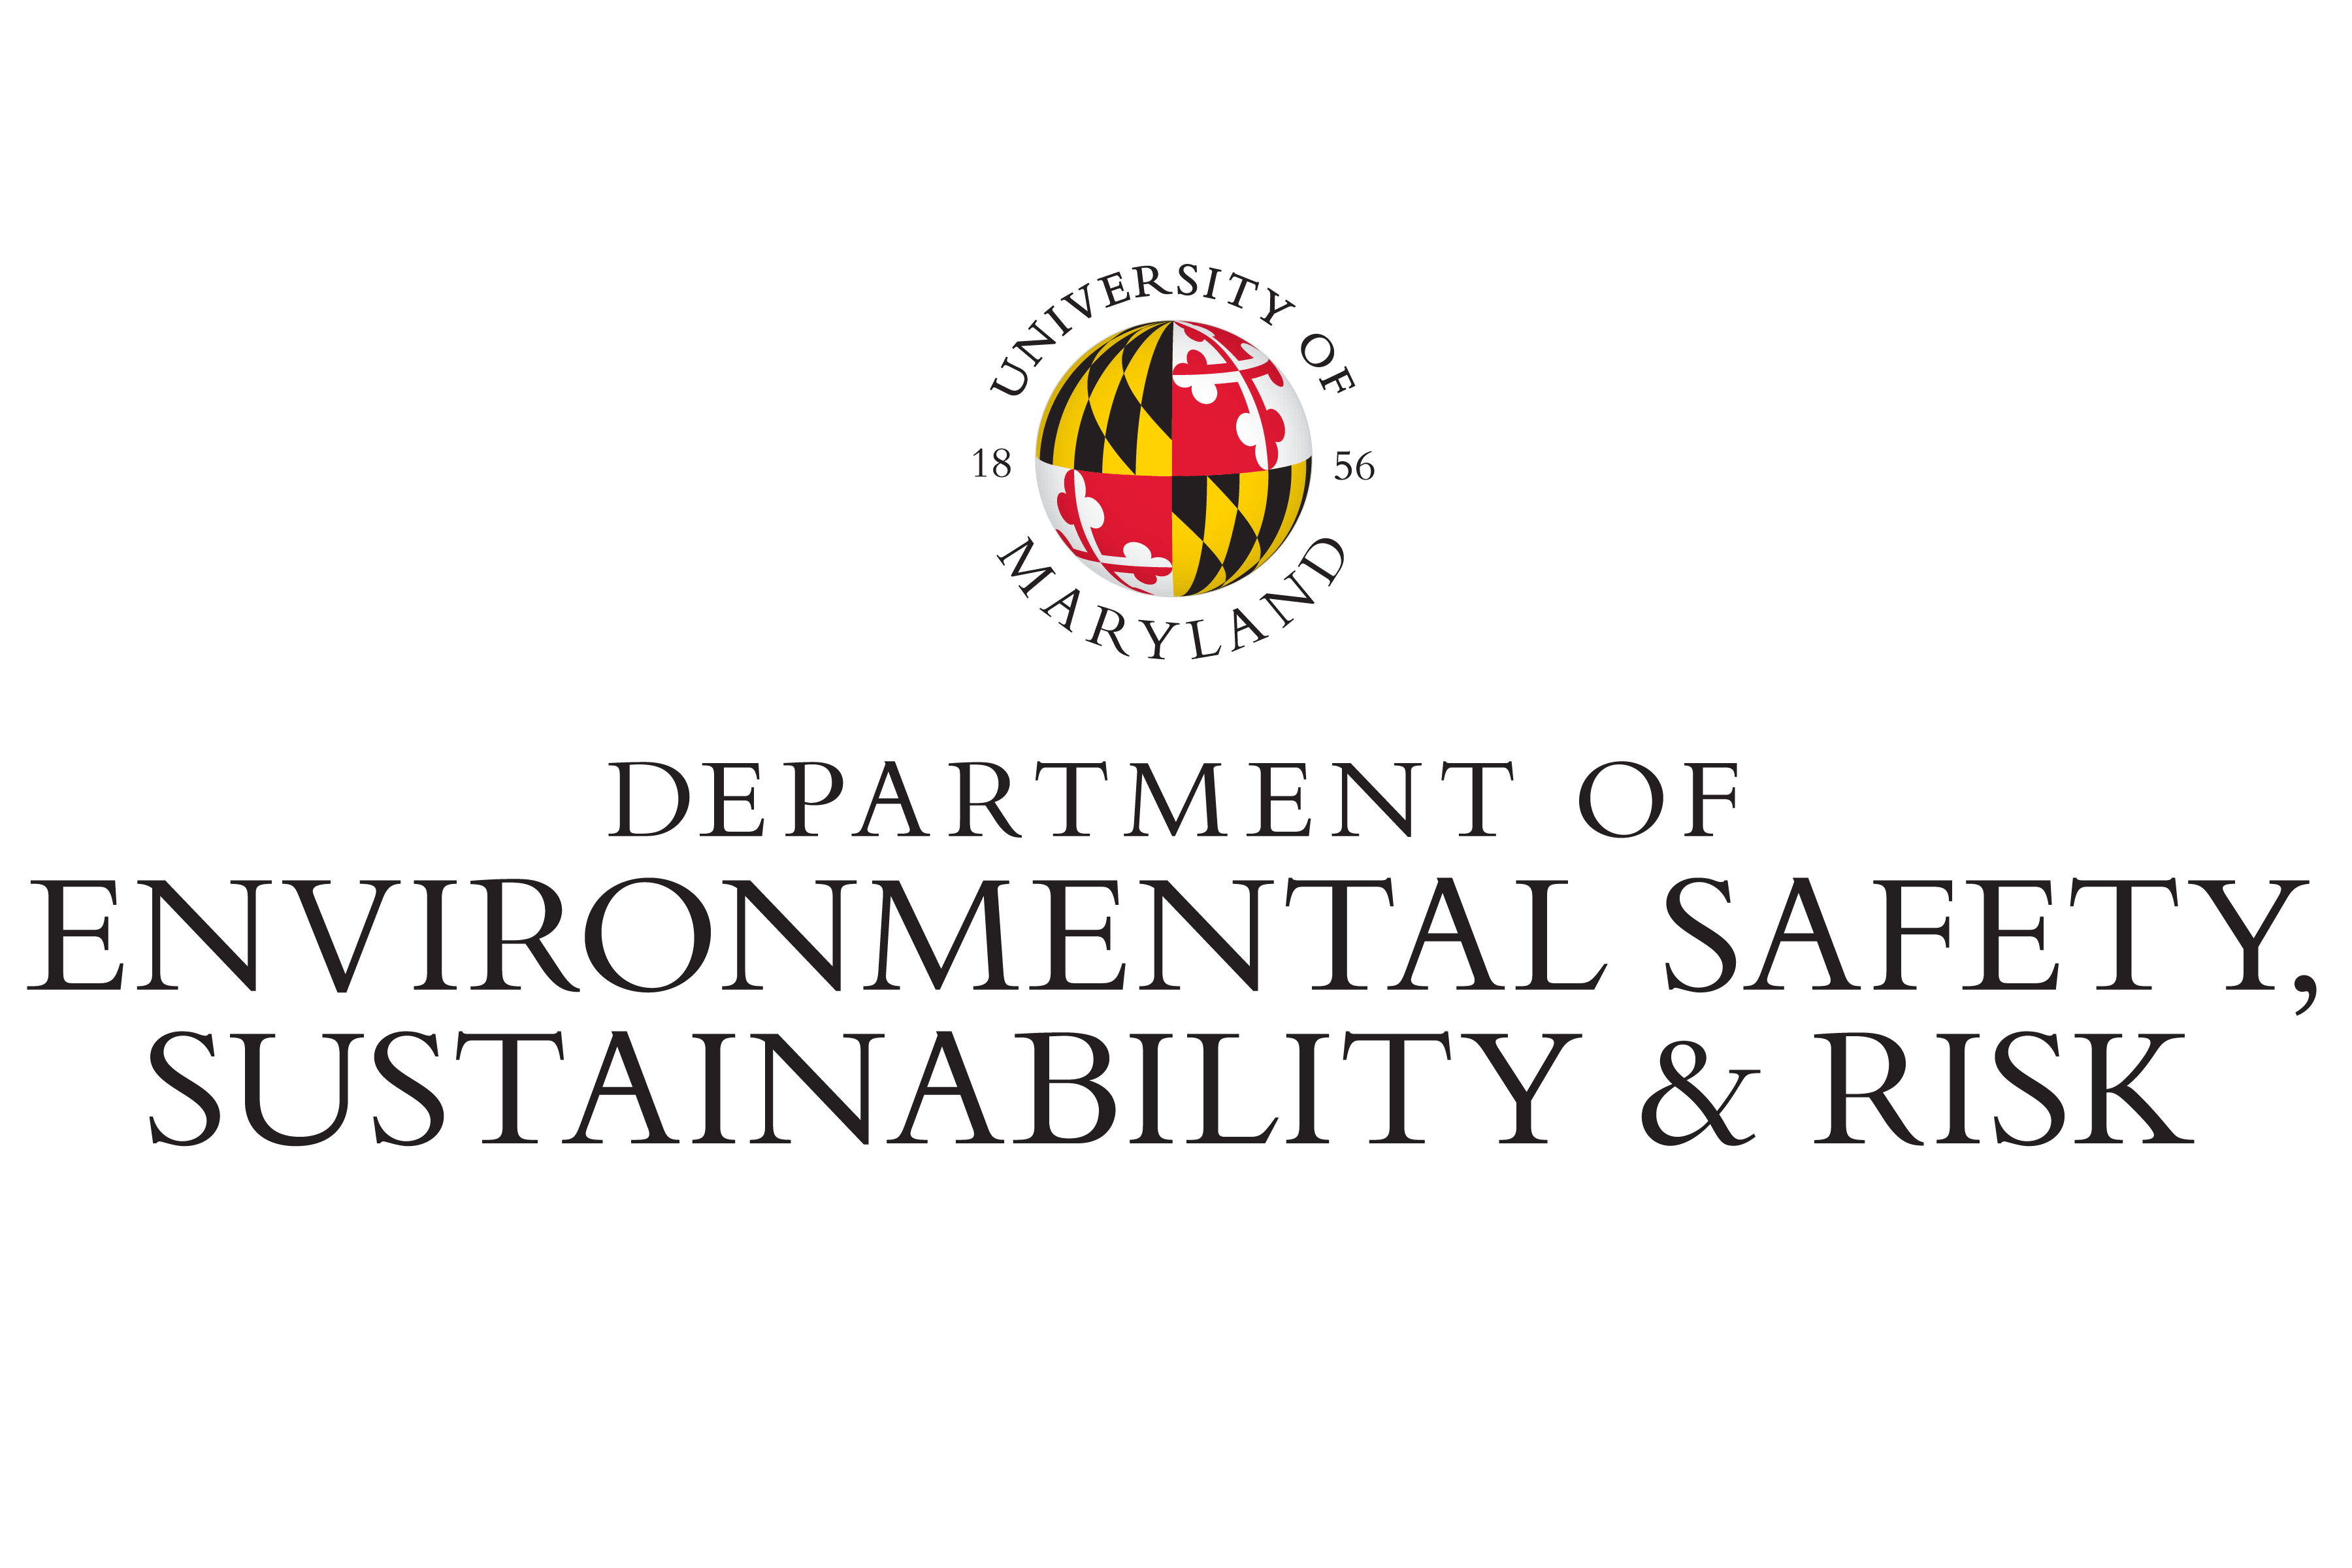 UMD Environmental Safety, Sustainability, and Risk